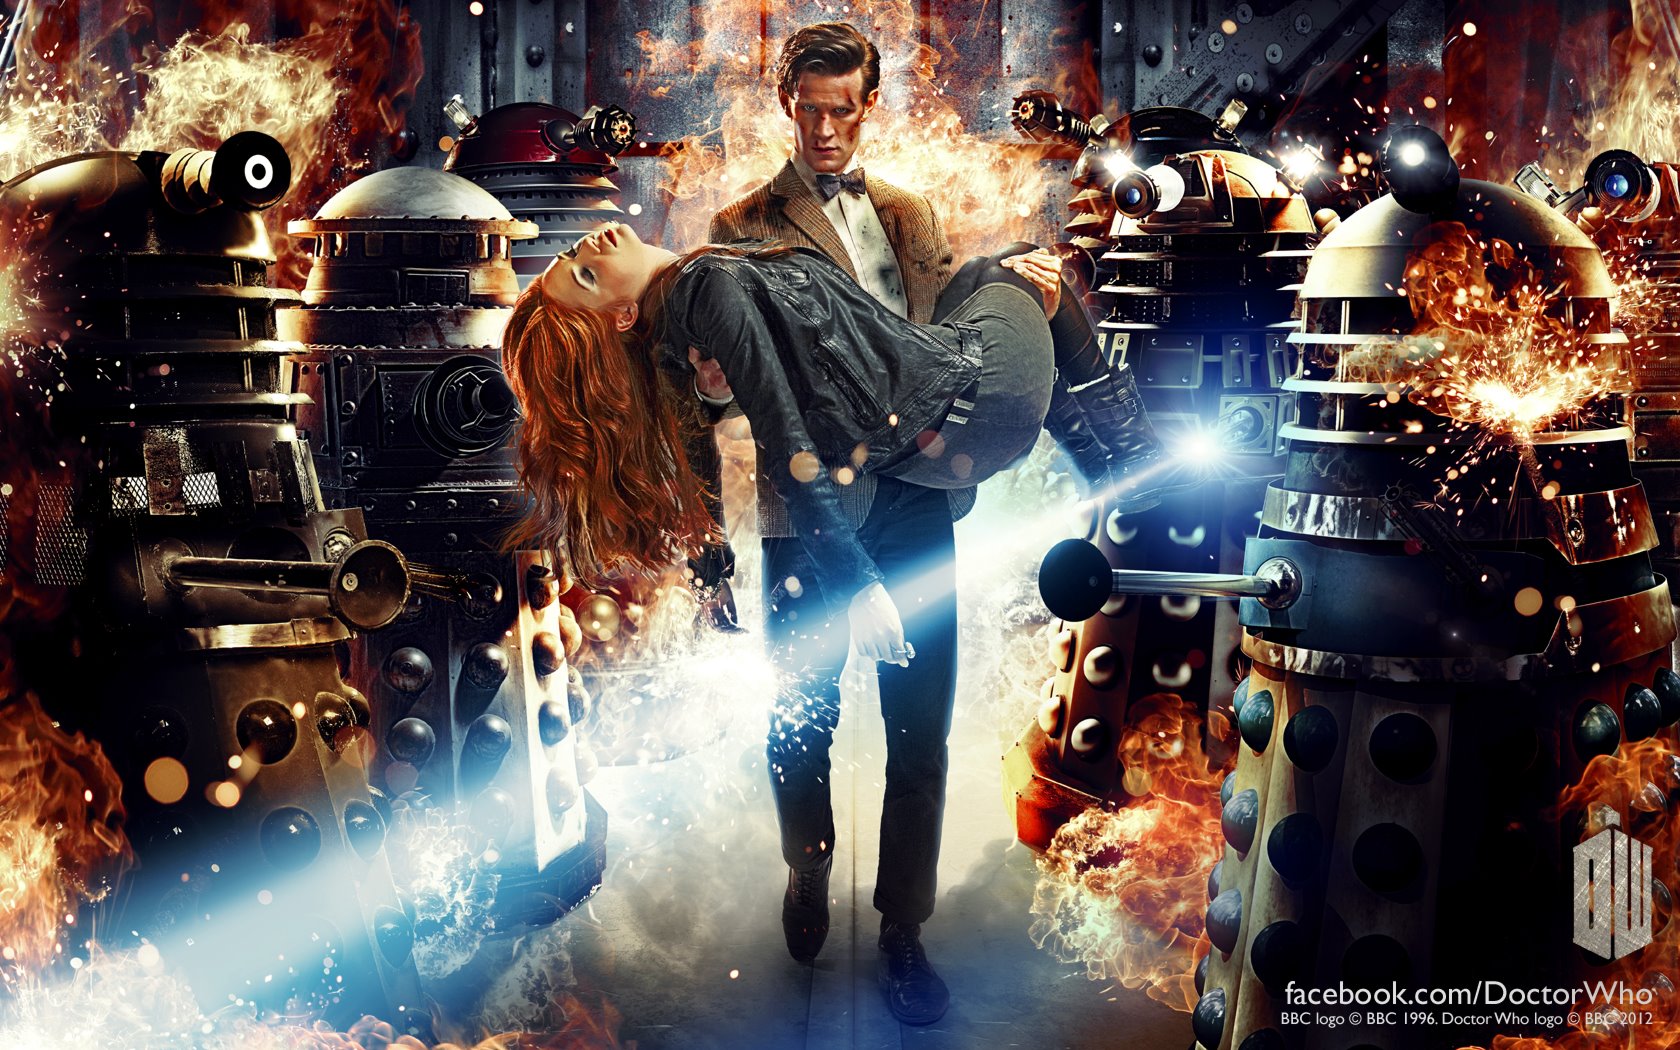 doctor who, tv show, dalek, explosion, fire, robot